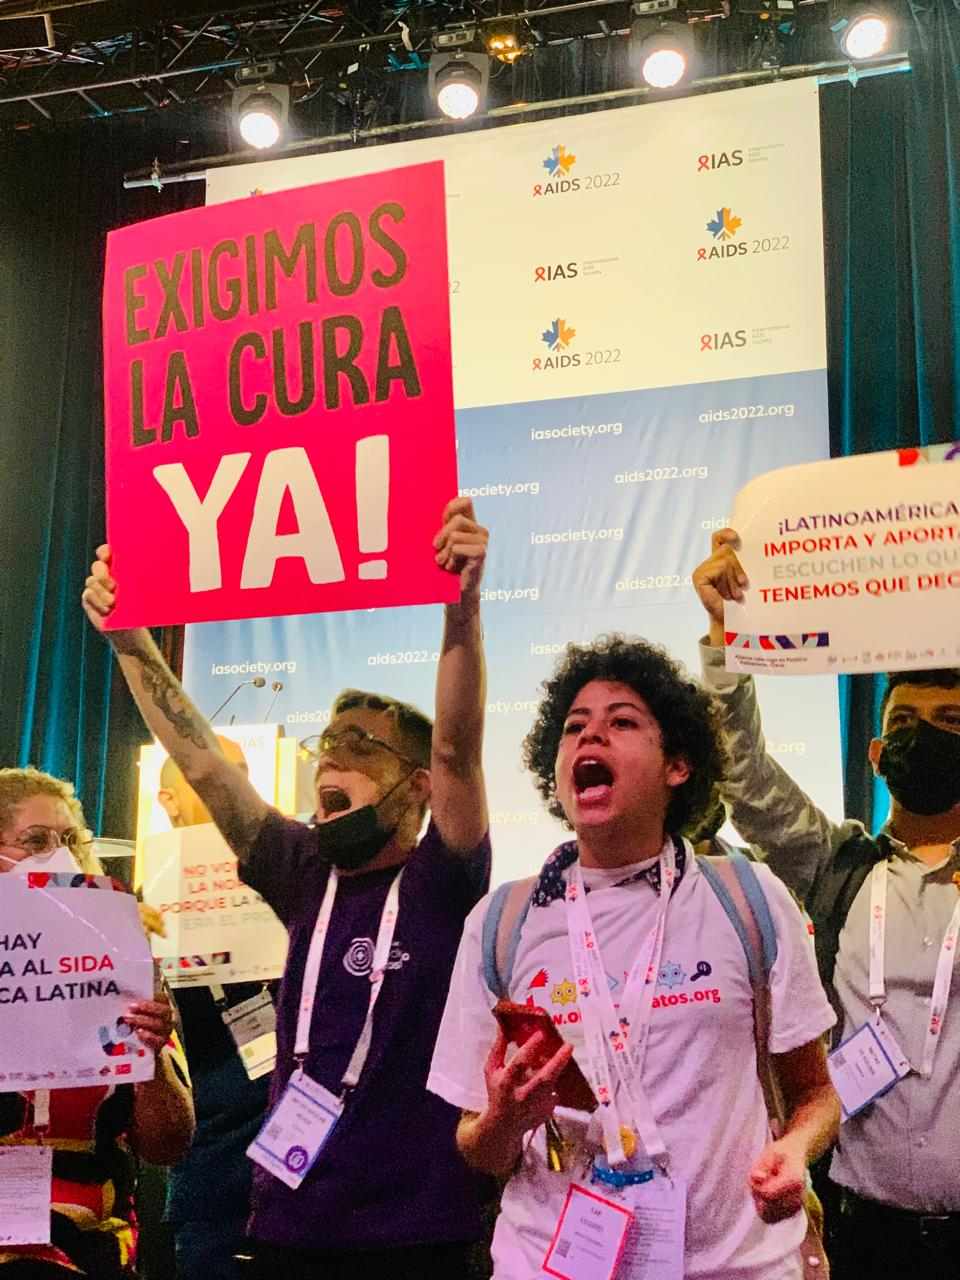 Irazú protesting at the AIDS 2022 conference